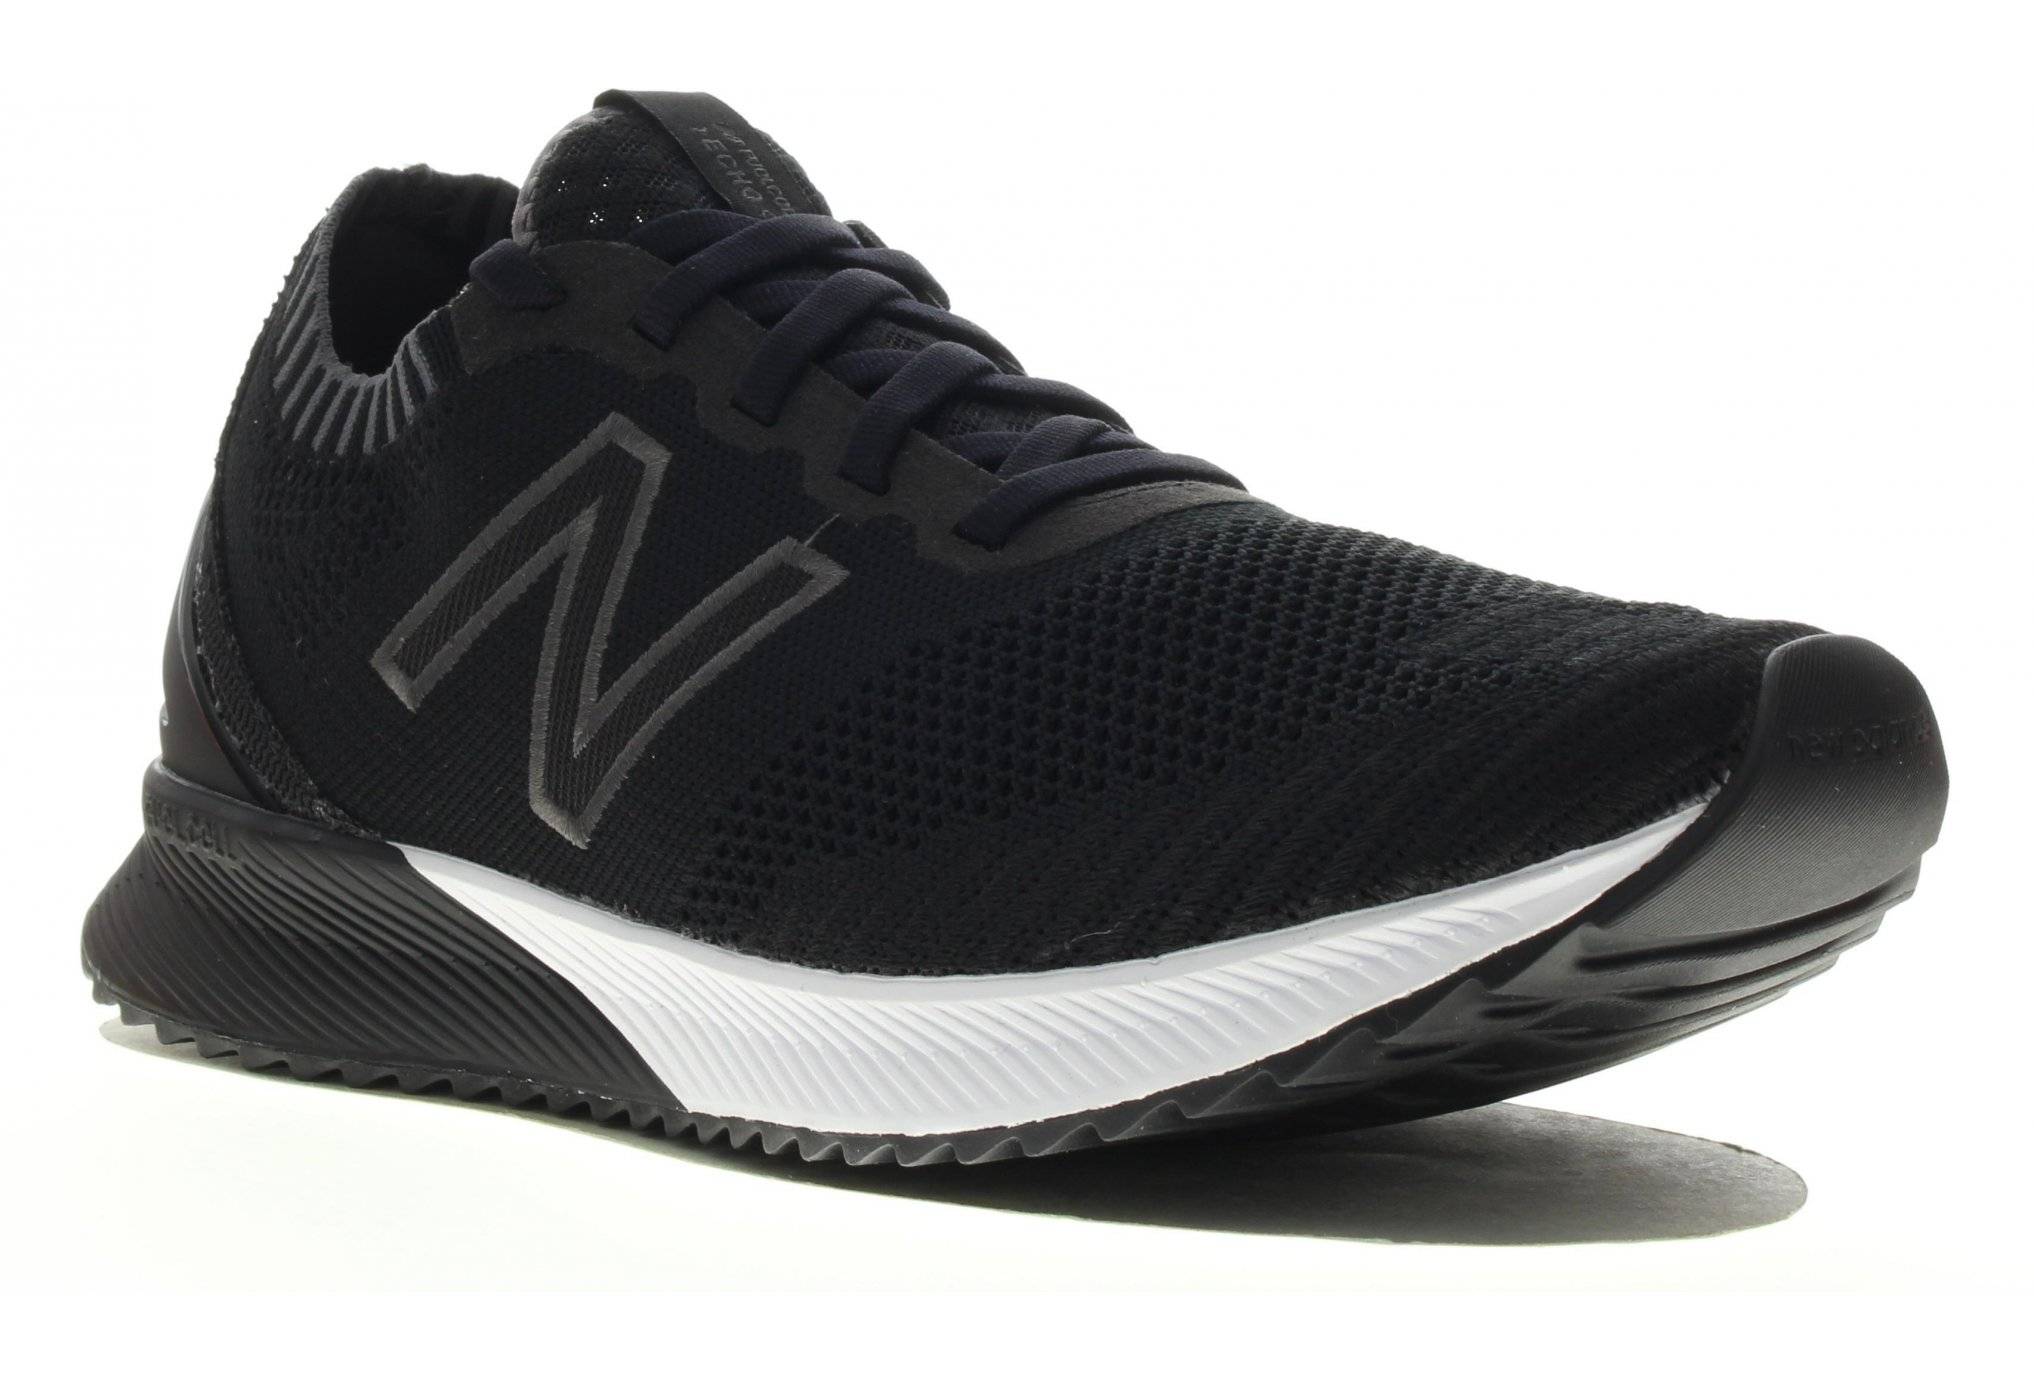 New Balance FuelCell Echo M 